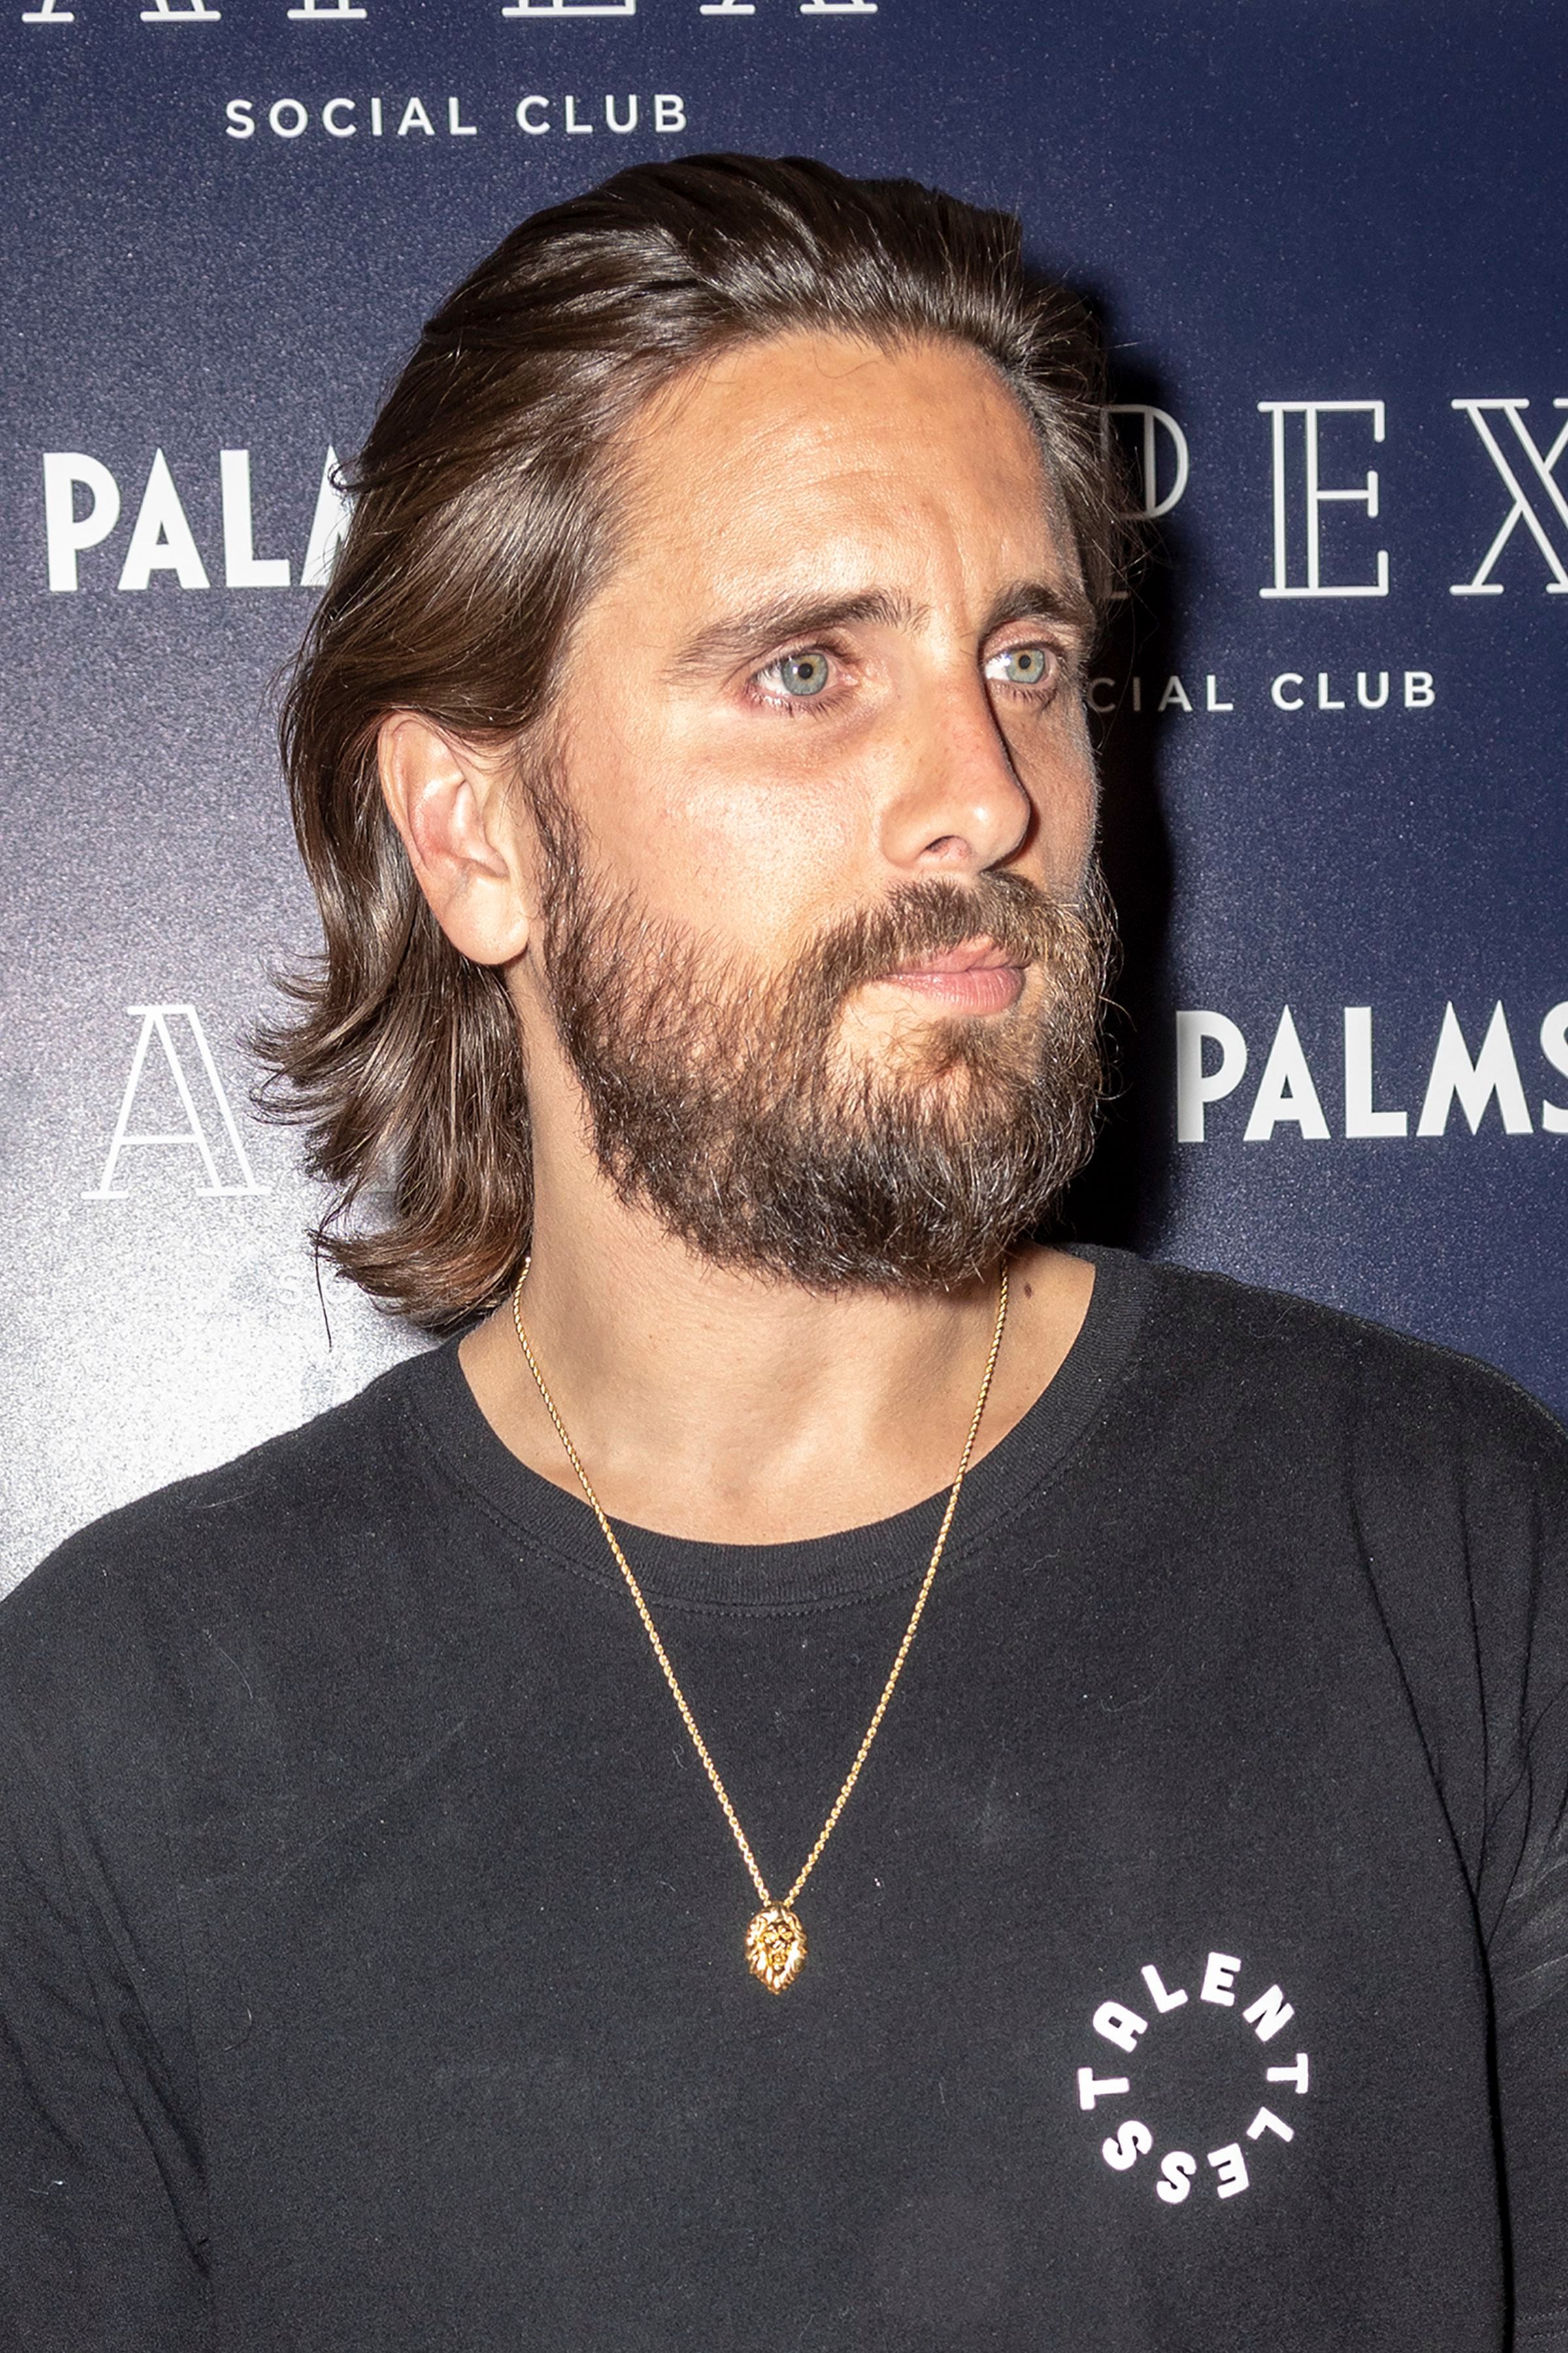 Scott Disick Transformation Photos From Young to Now